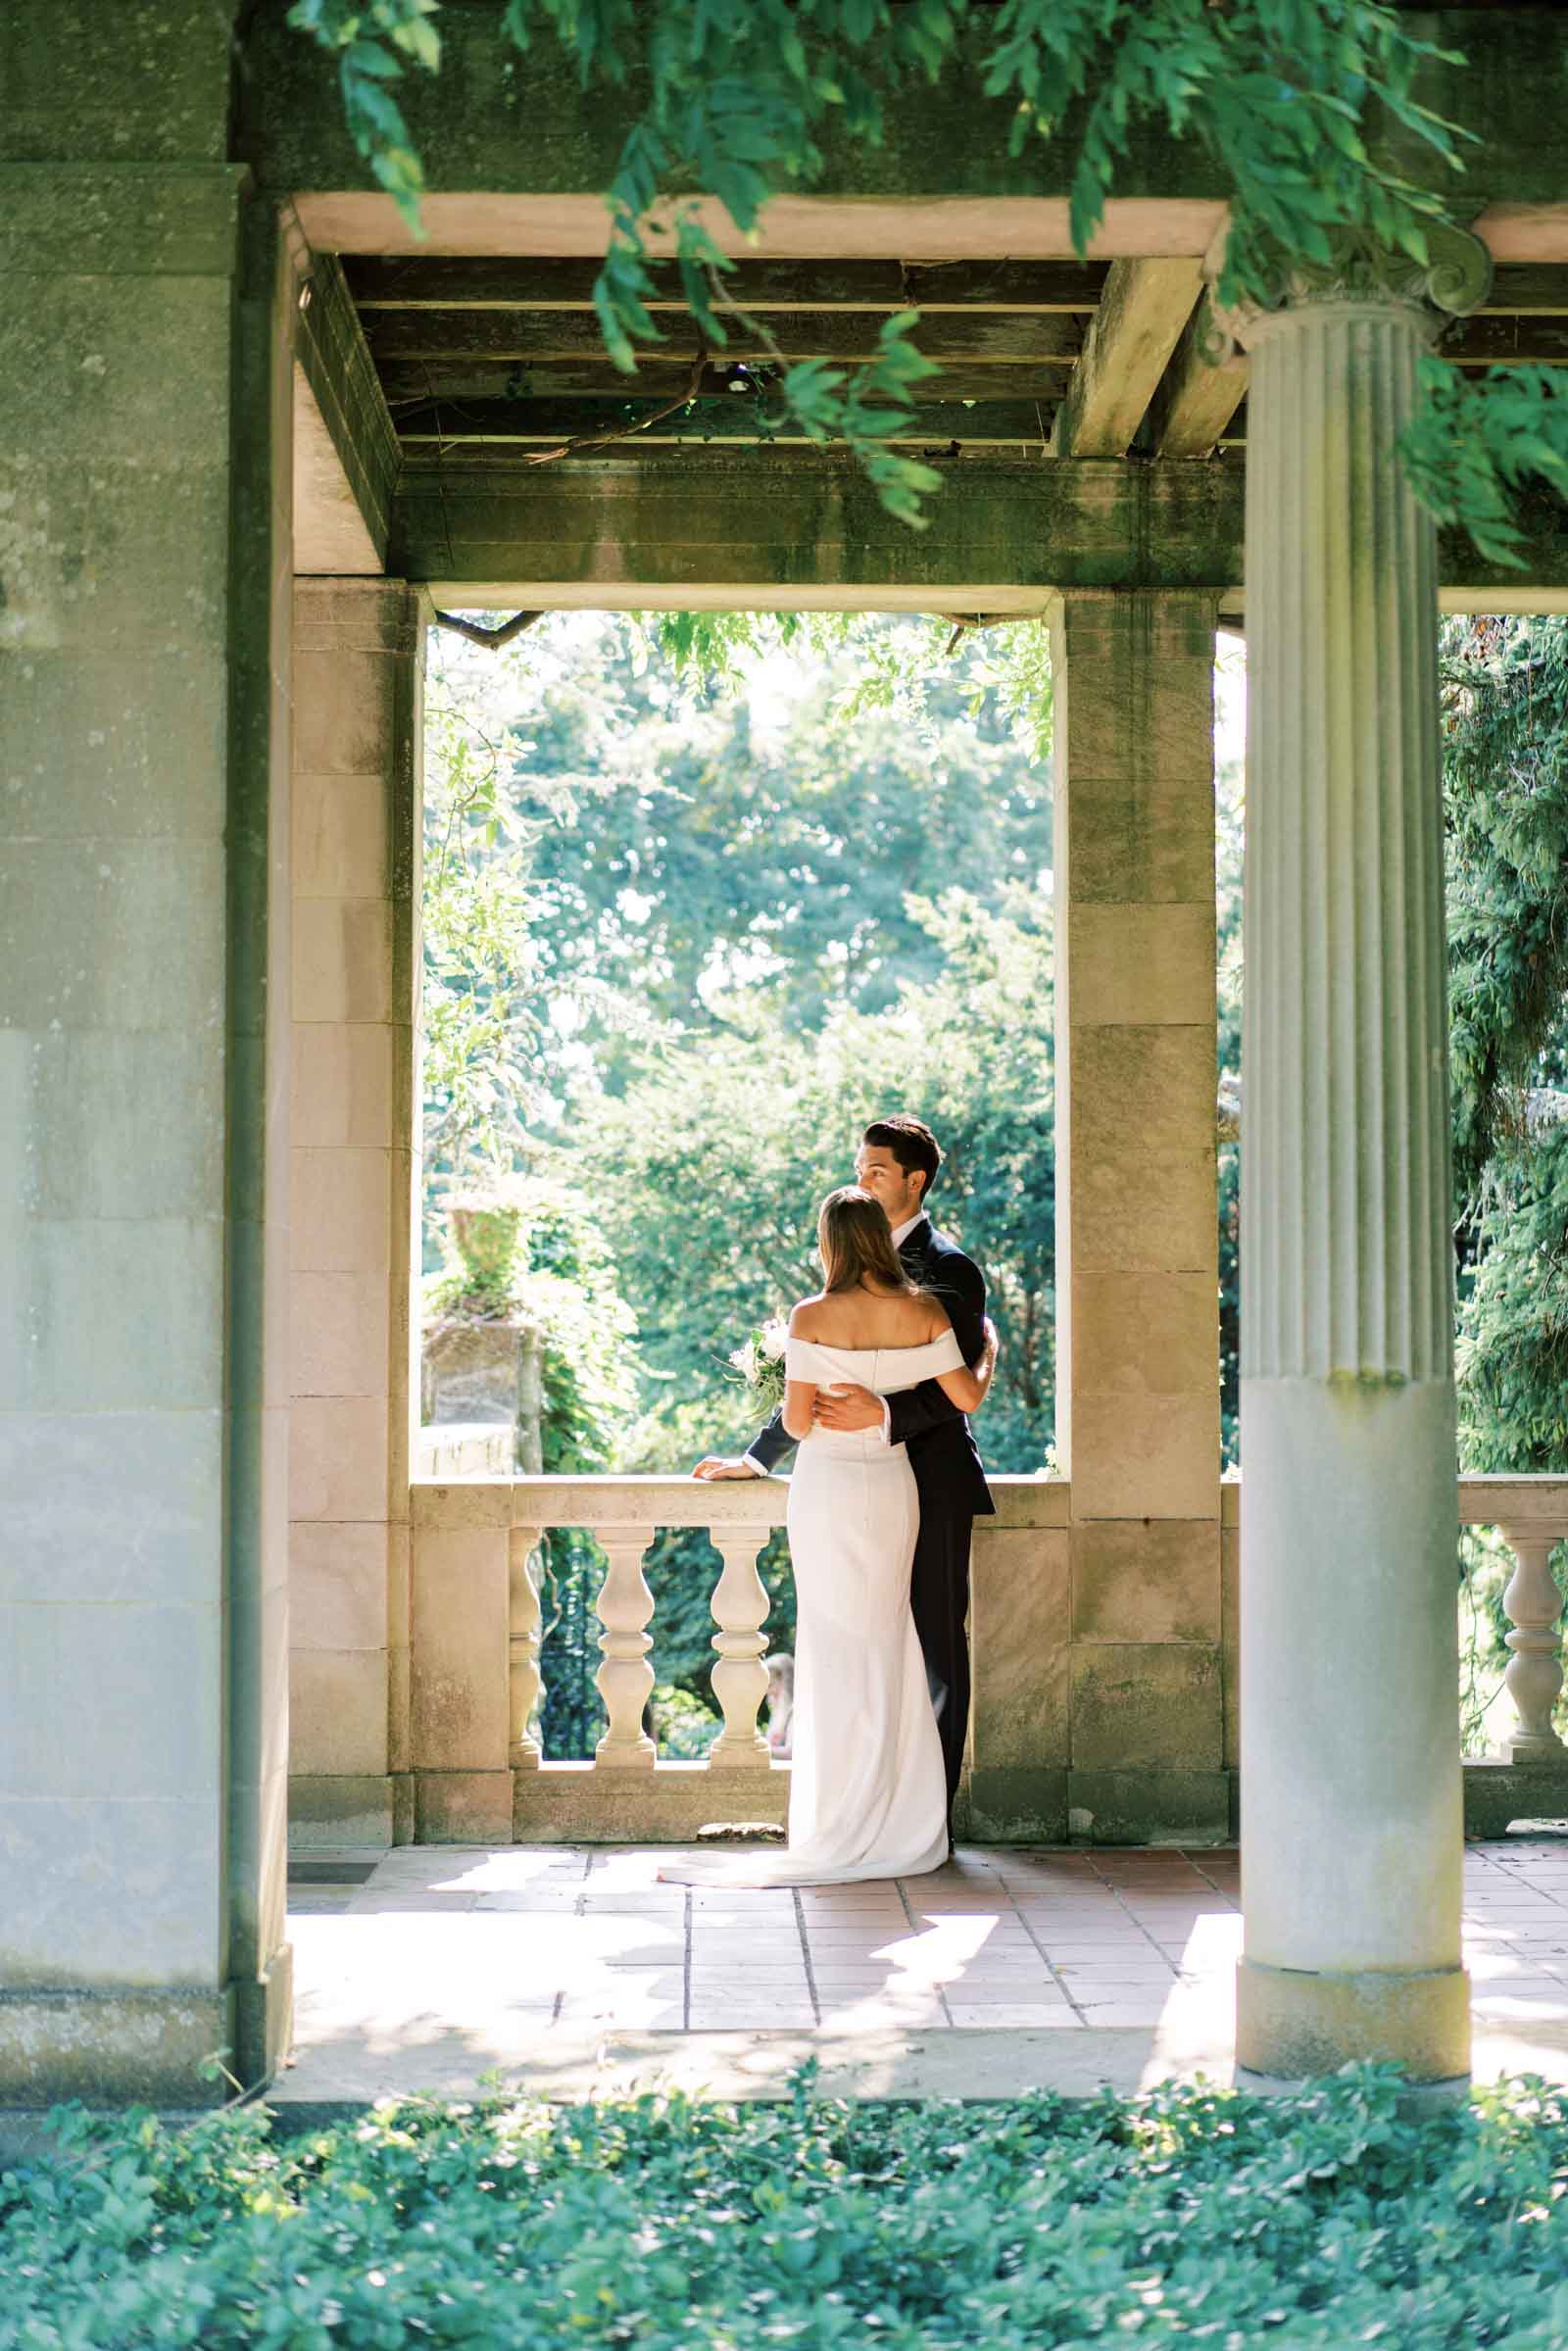 Bride and groom embrace under an archway during their wedding at a breathtaking historical venue in Massachusetts